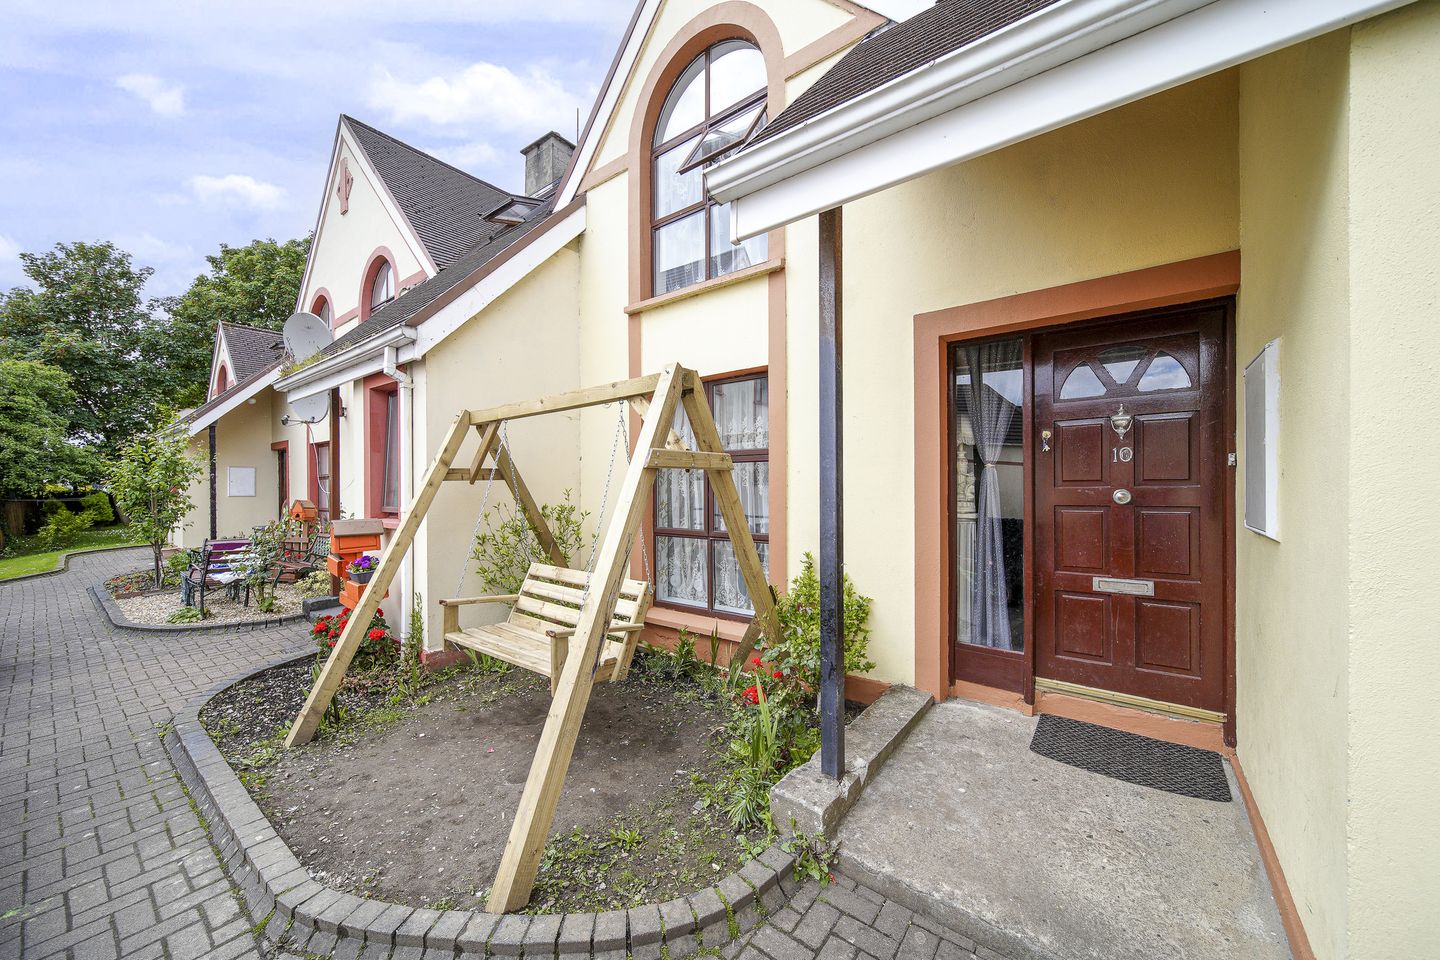 10 Fortwell Court, Fortwell, Letterkenny, Co. Donegal